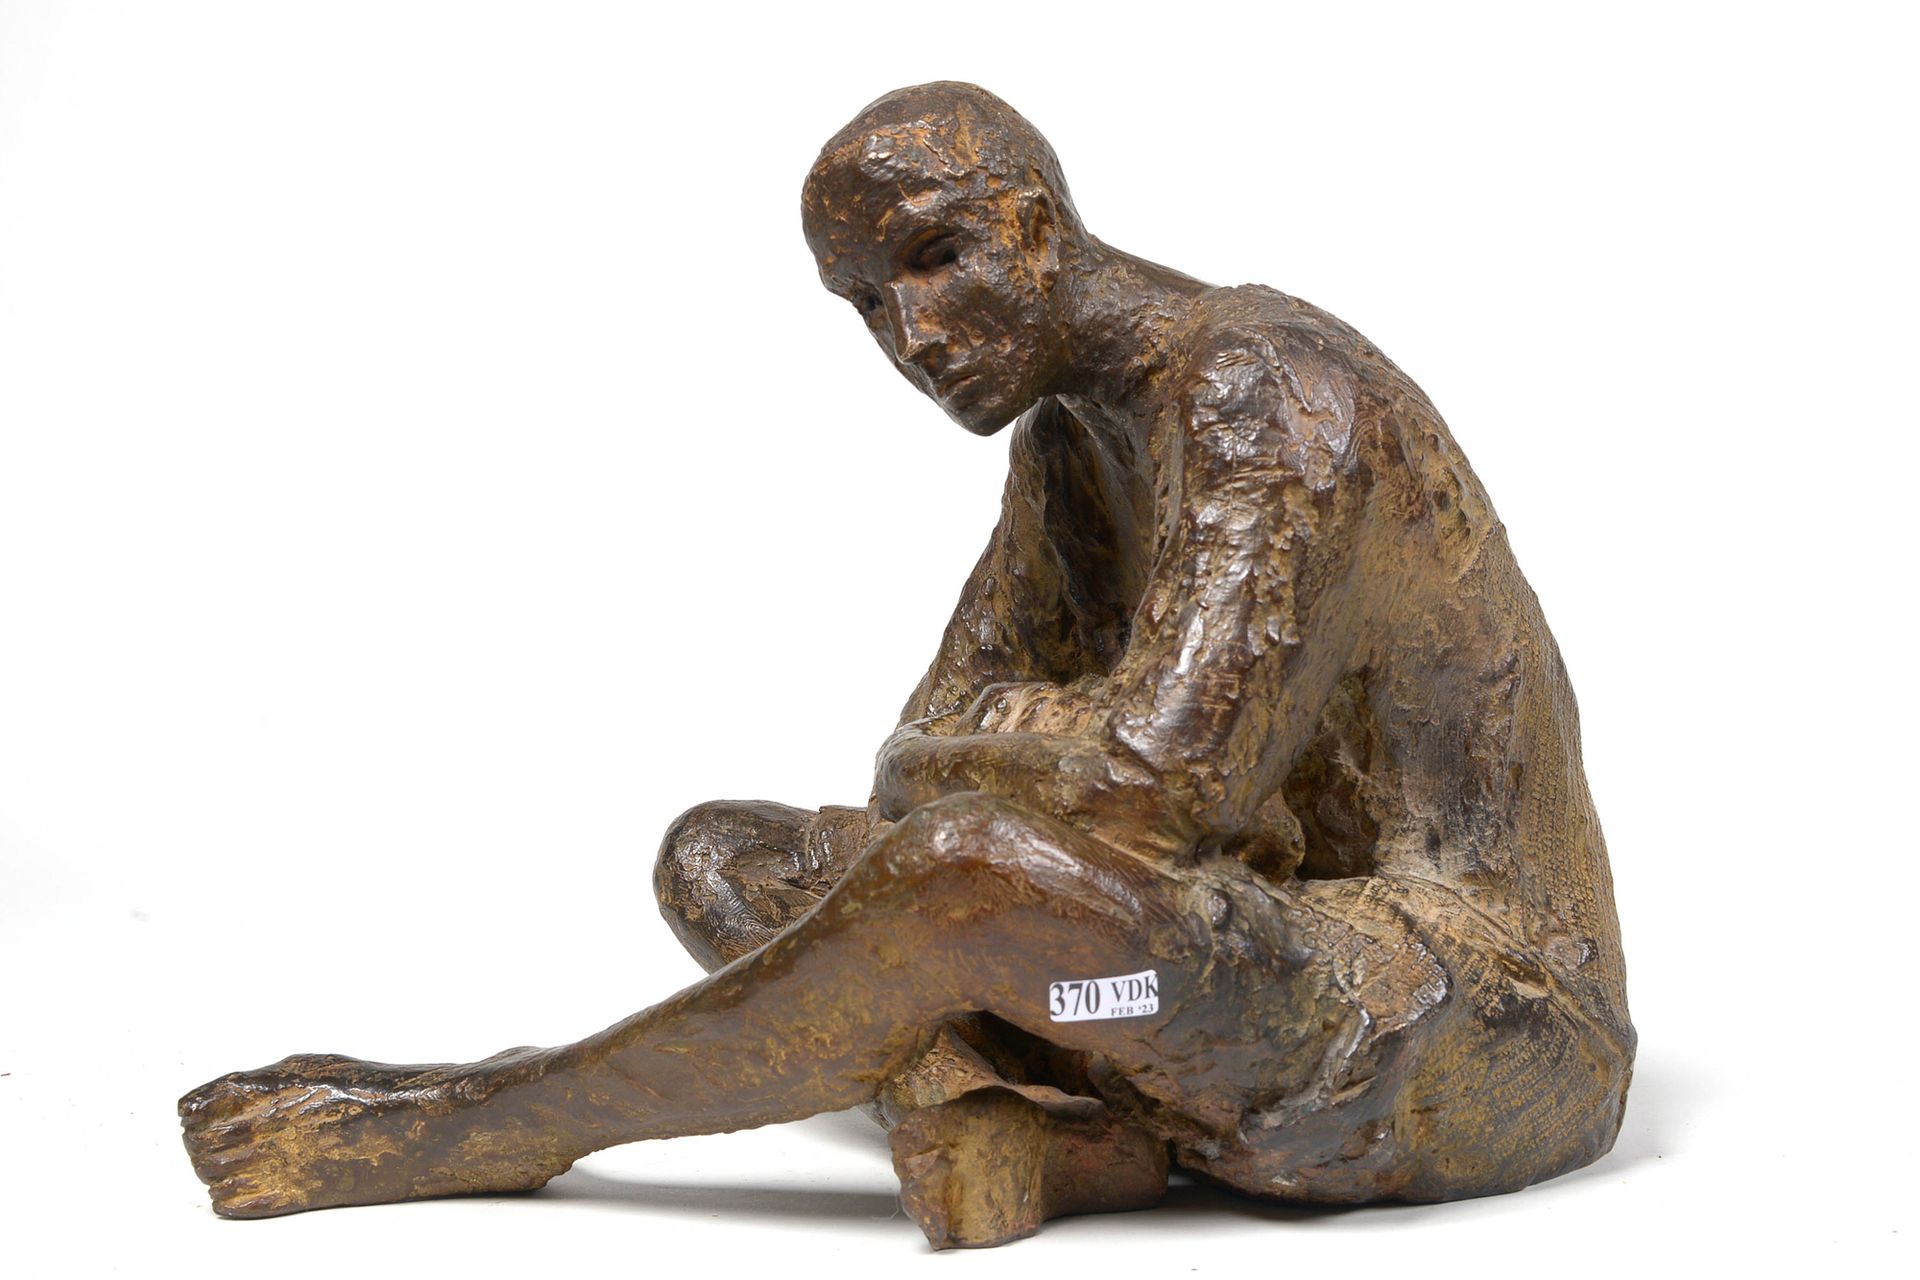 BEAUMONT Hanneke (1947) "Seated man" in bronze with brown patina. By Hanneke Bea&hellip;